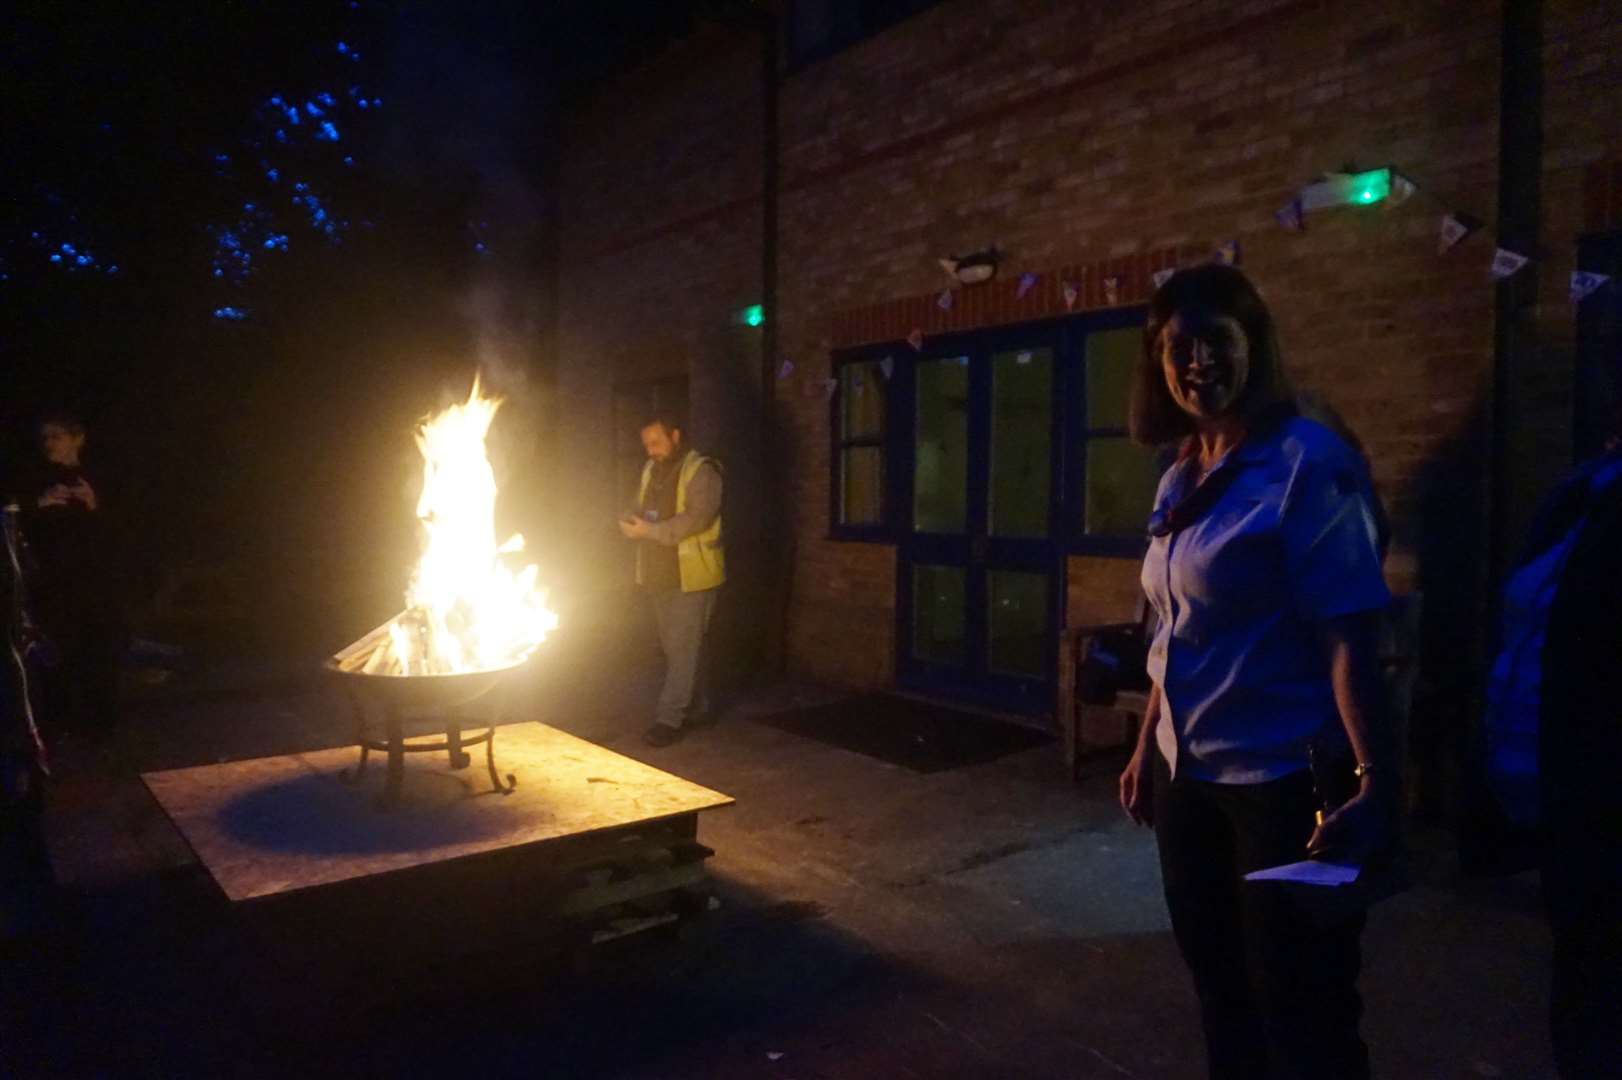 Girlguiding County Commissioner Jane Harvey lit a beacon in Wilmington. The Queen has been patron since 1952 and joined the 1st Buckingham Palace Brownie pack and Guide Company in 1937